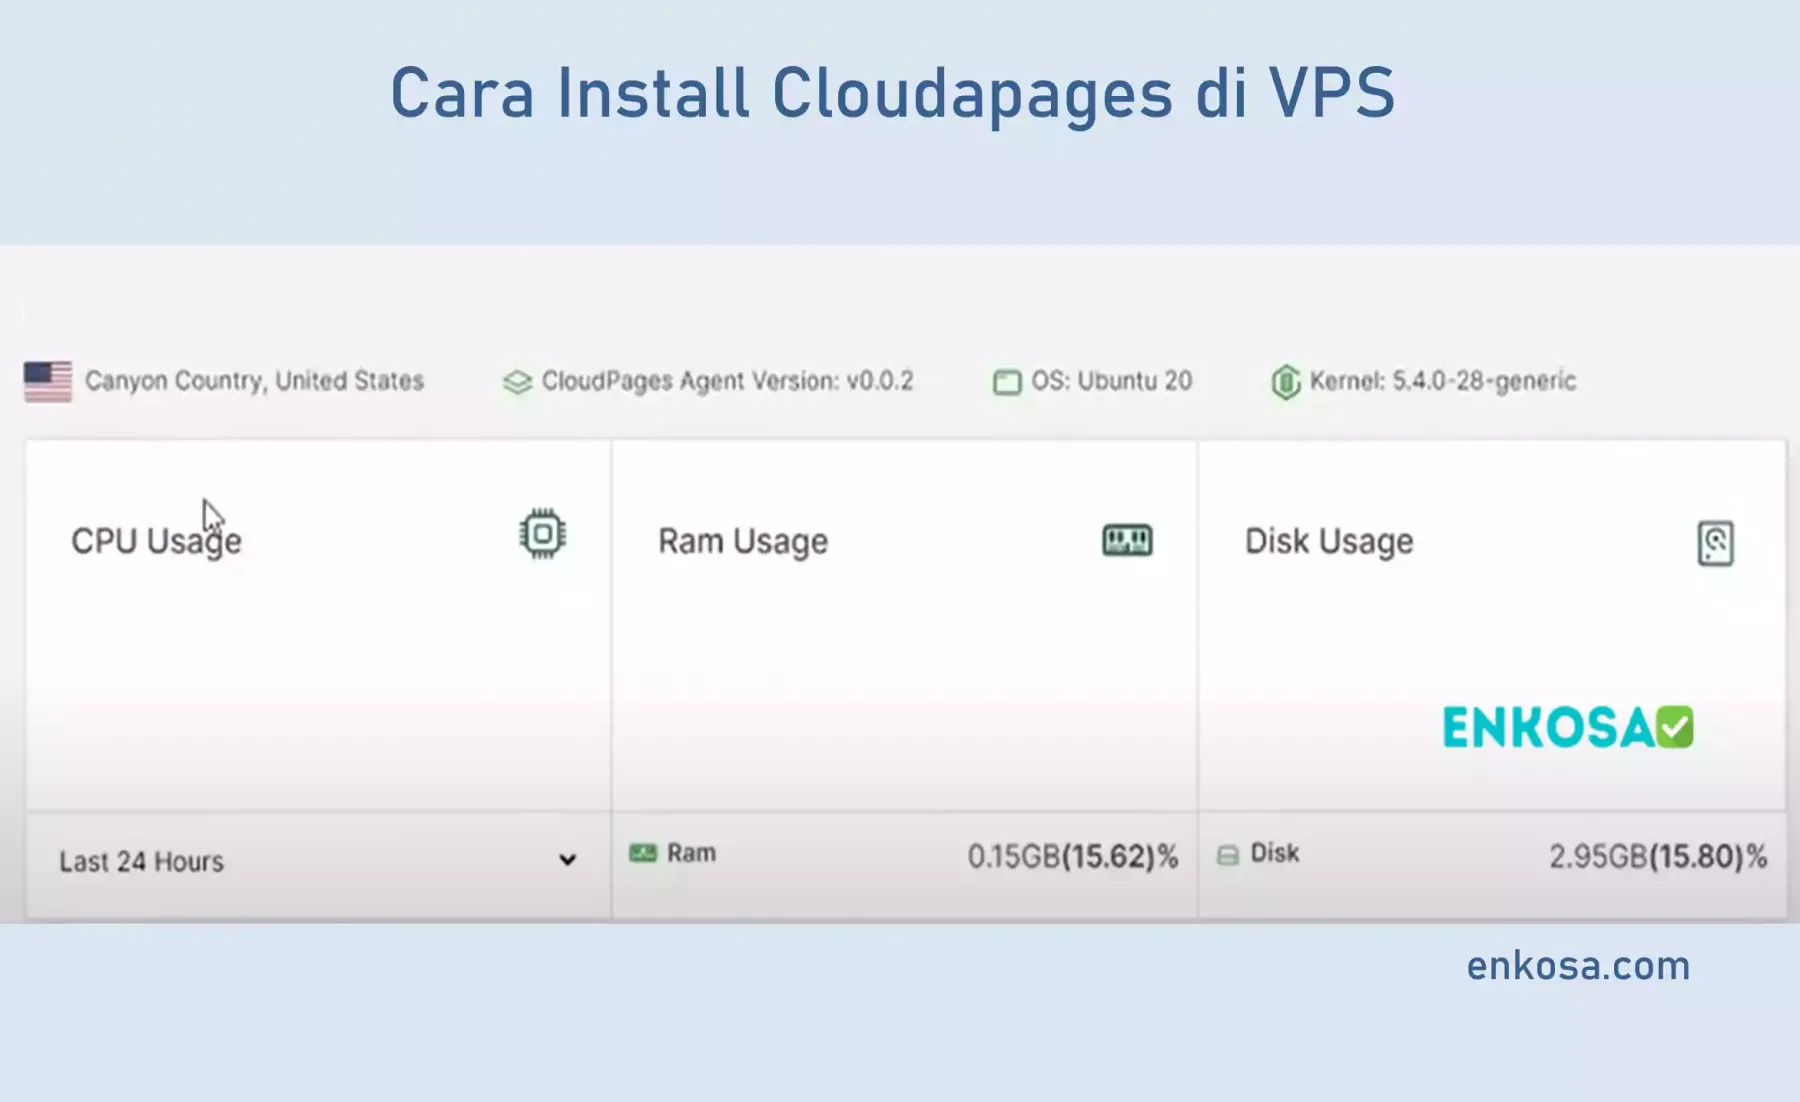 Cara Install Cloudpages Untuk Manage VPS